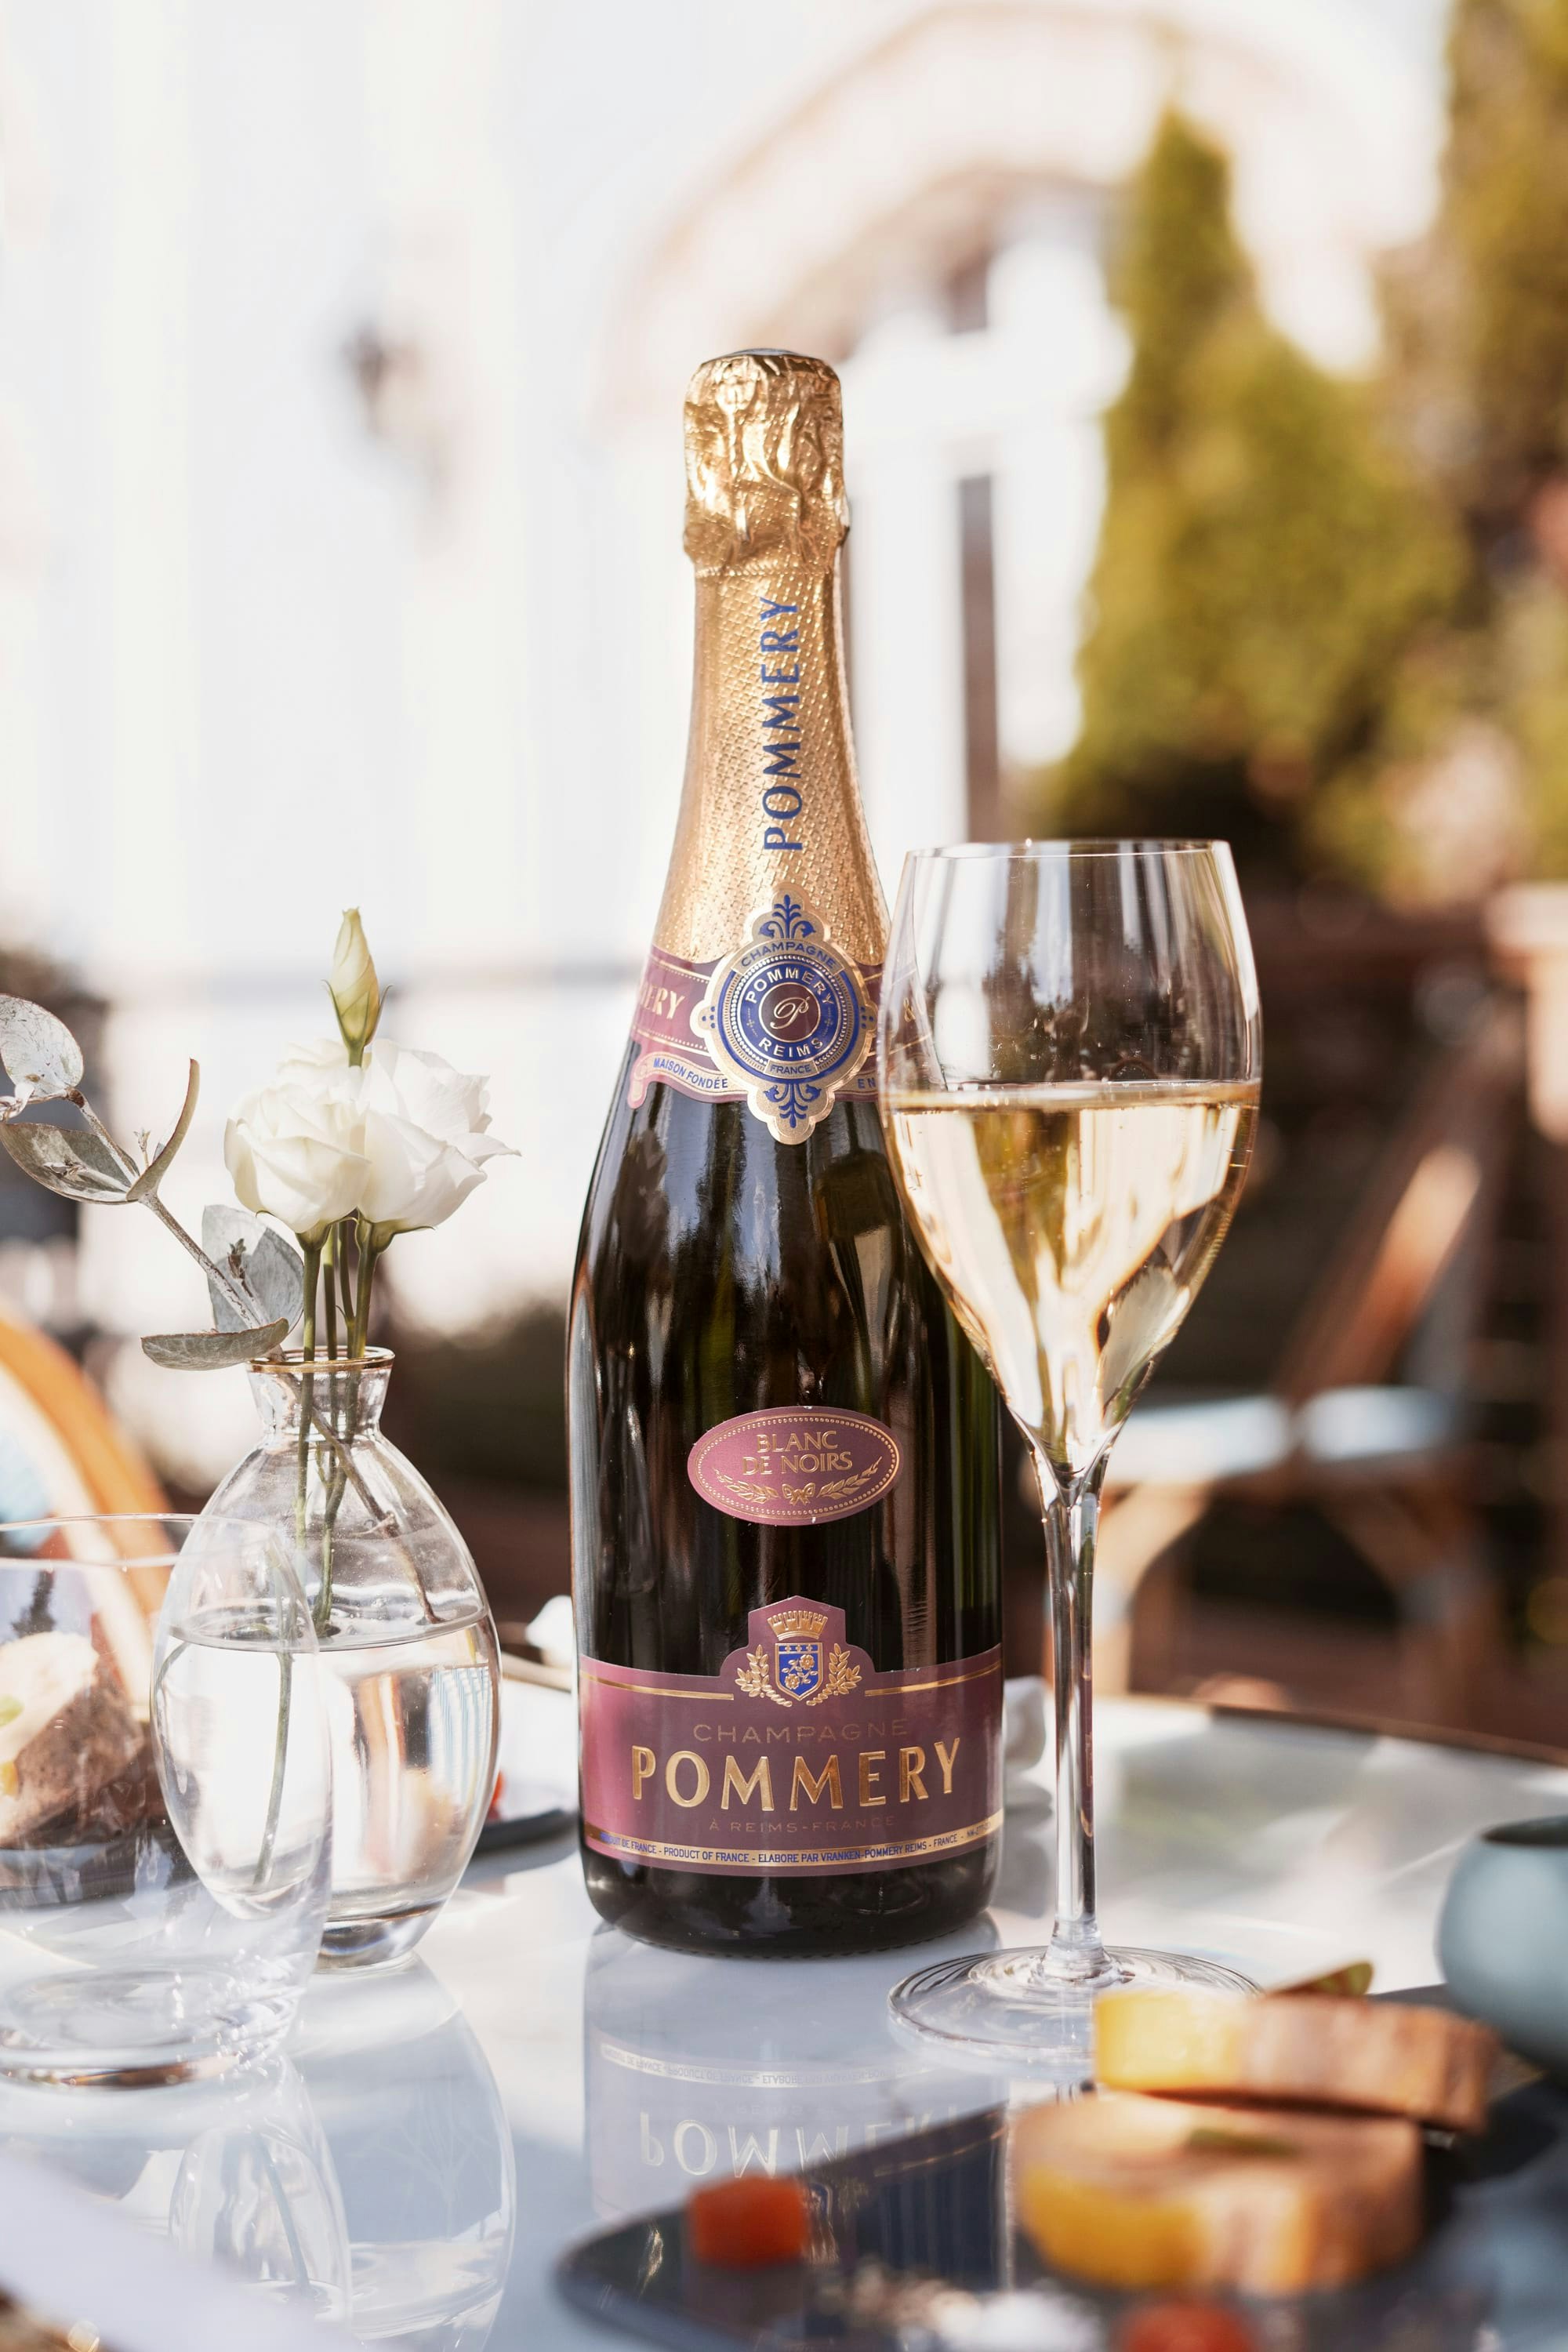 Bottle of Pommery Blanc de Noirs with glass on plate